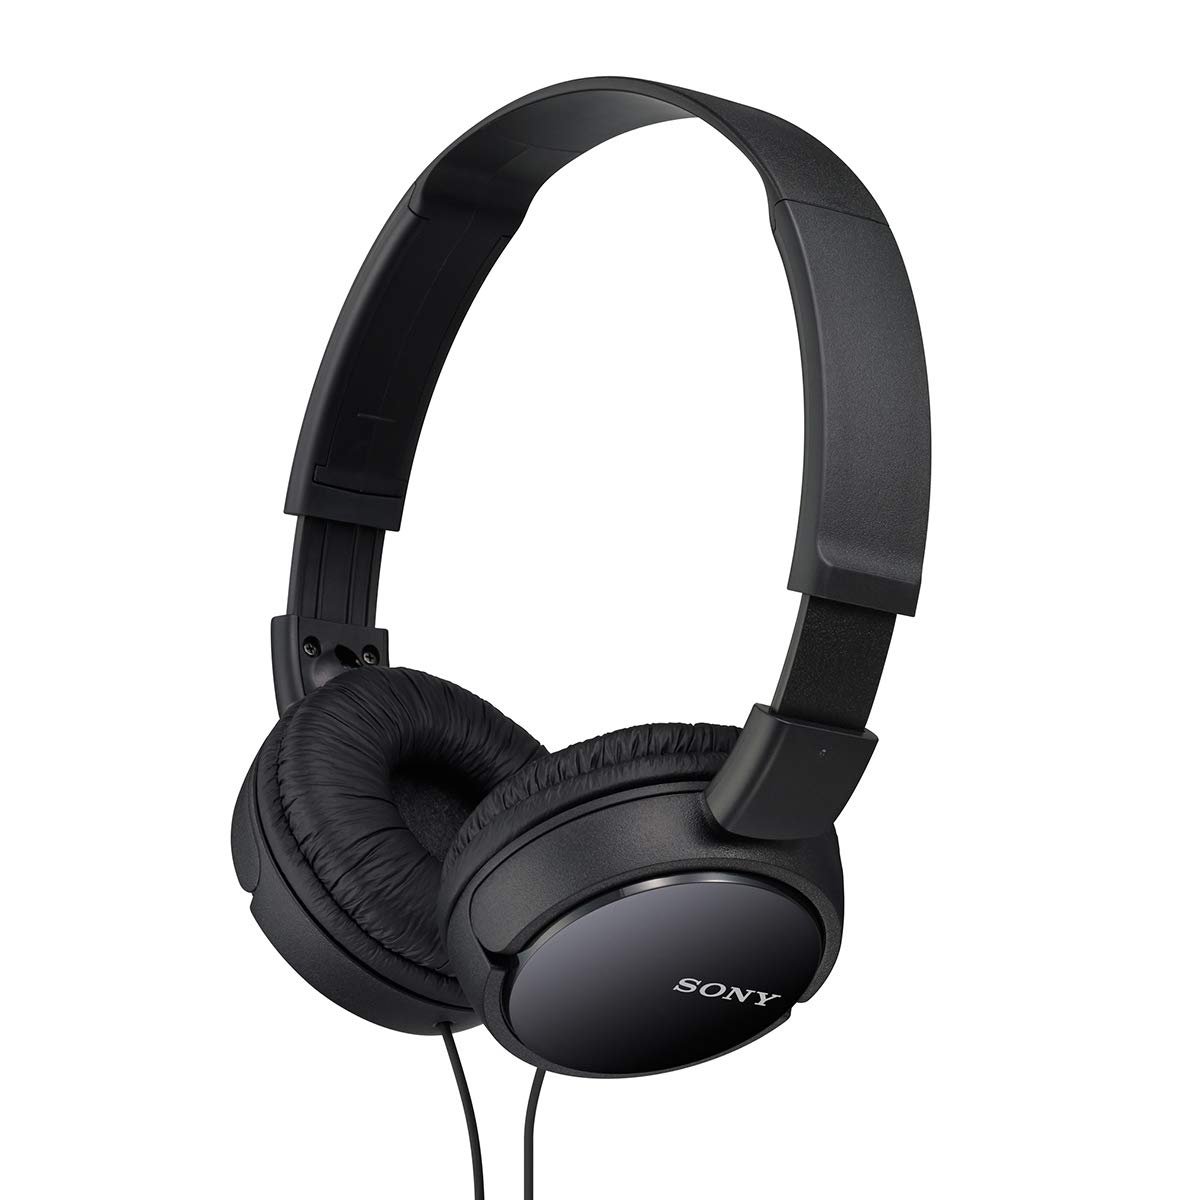 Sony MDRZX110 Stereo Headphones - Assorted Colors / Black